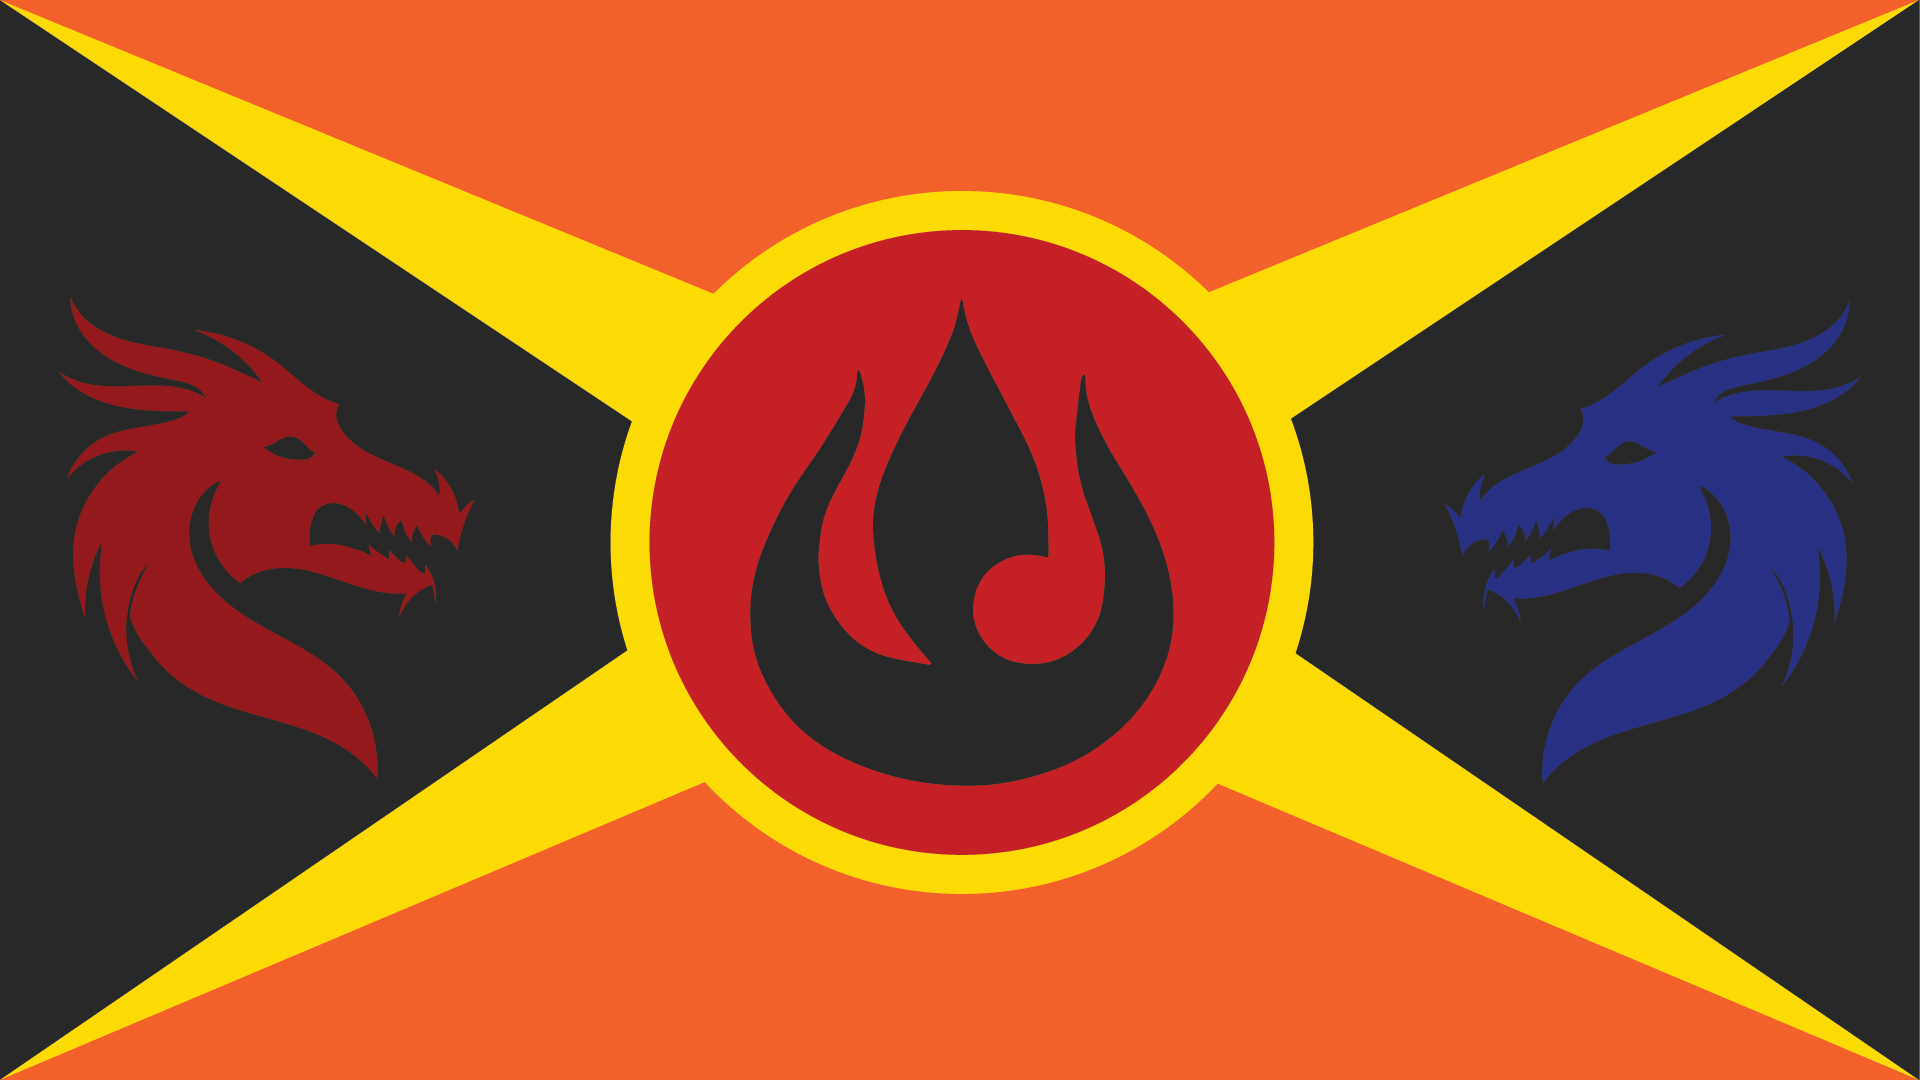 Created a flag for the Fire Nation!